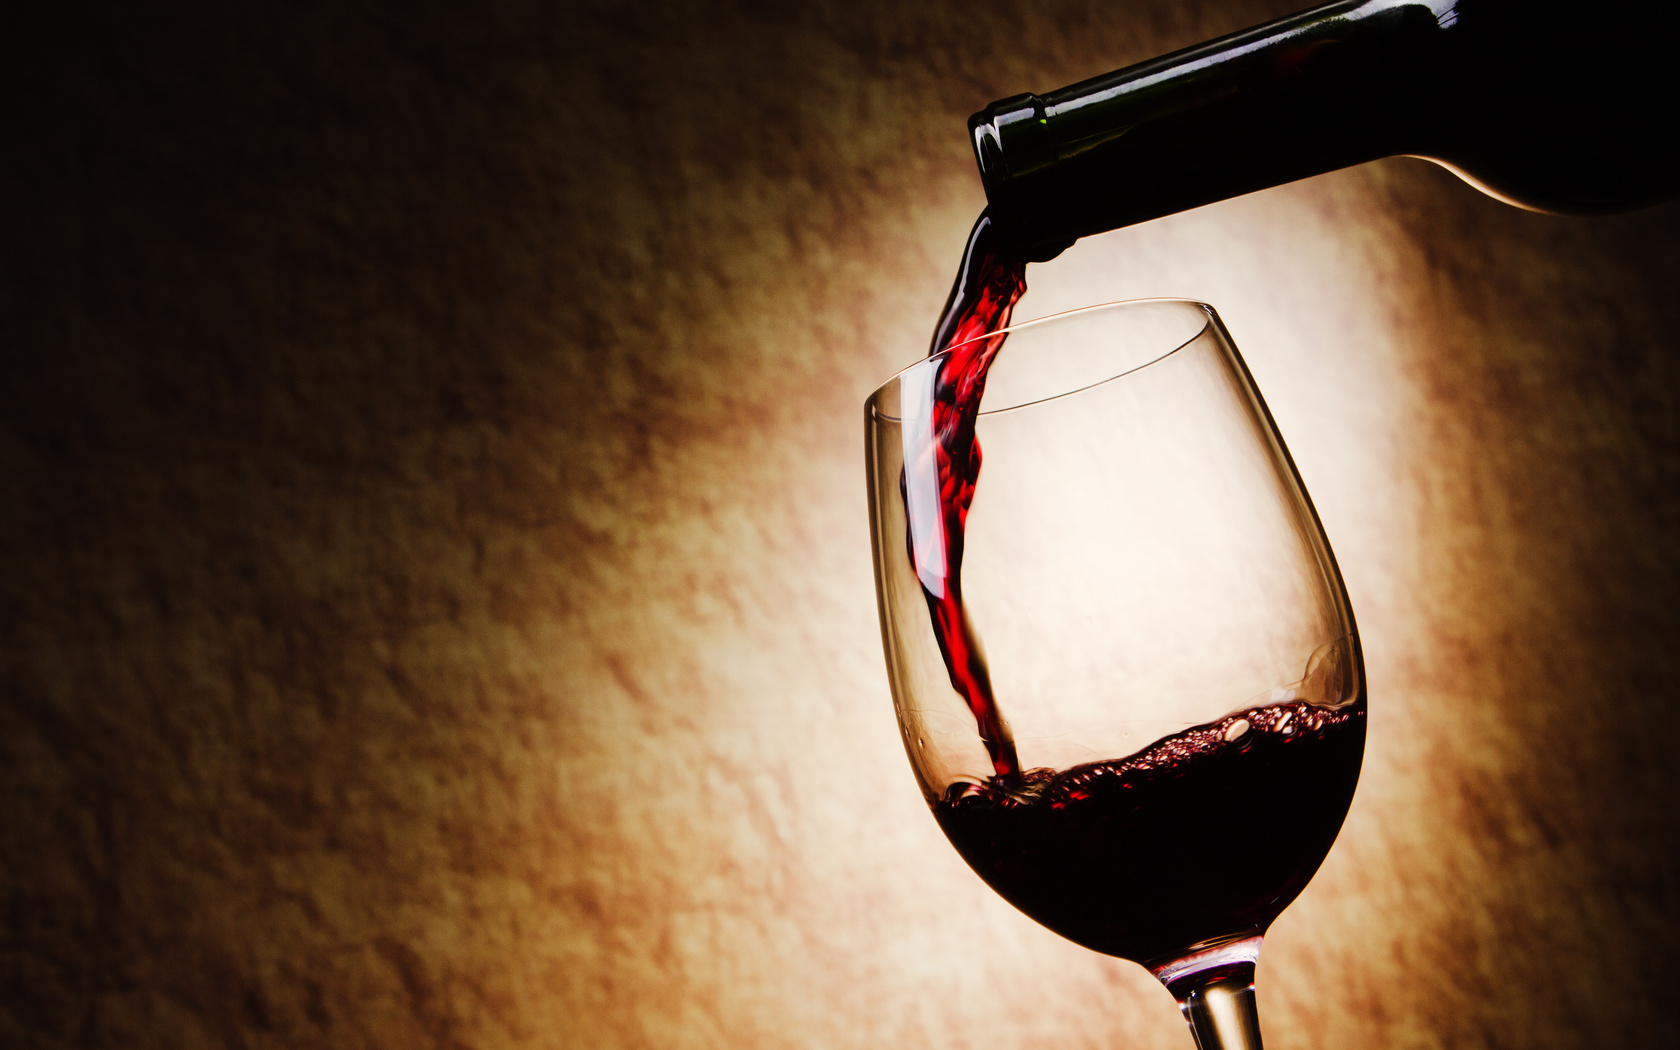 Ancient Egyptian kings avoided wine because of its resemblance to blood.